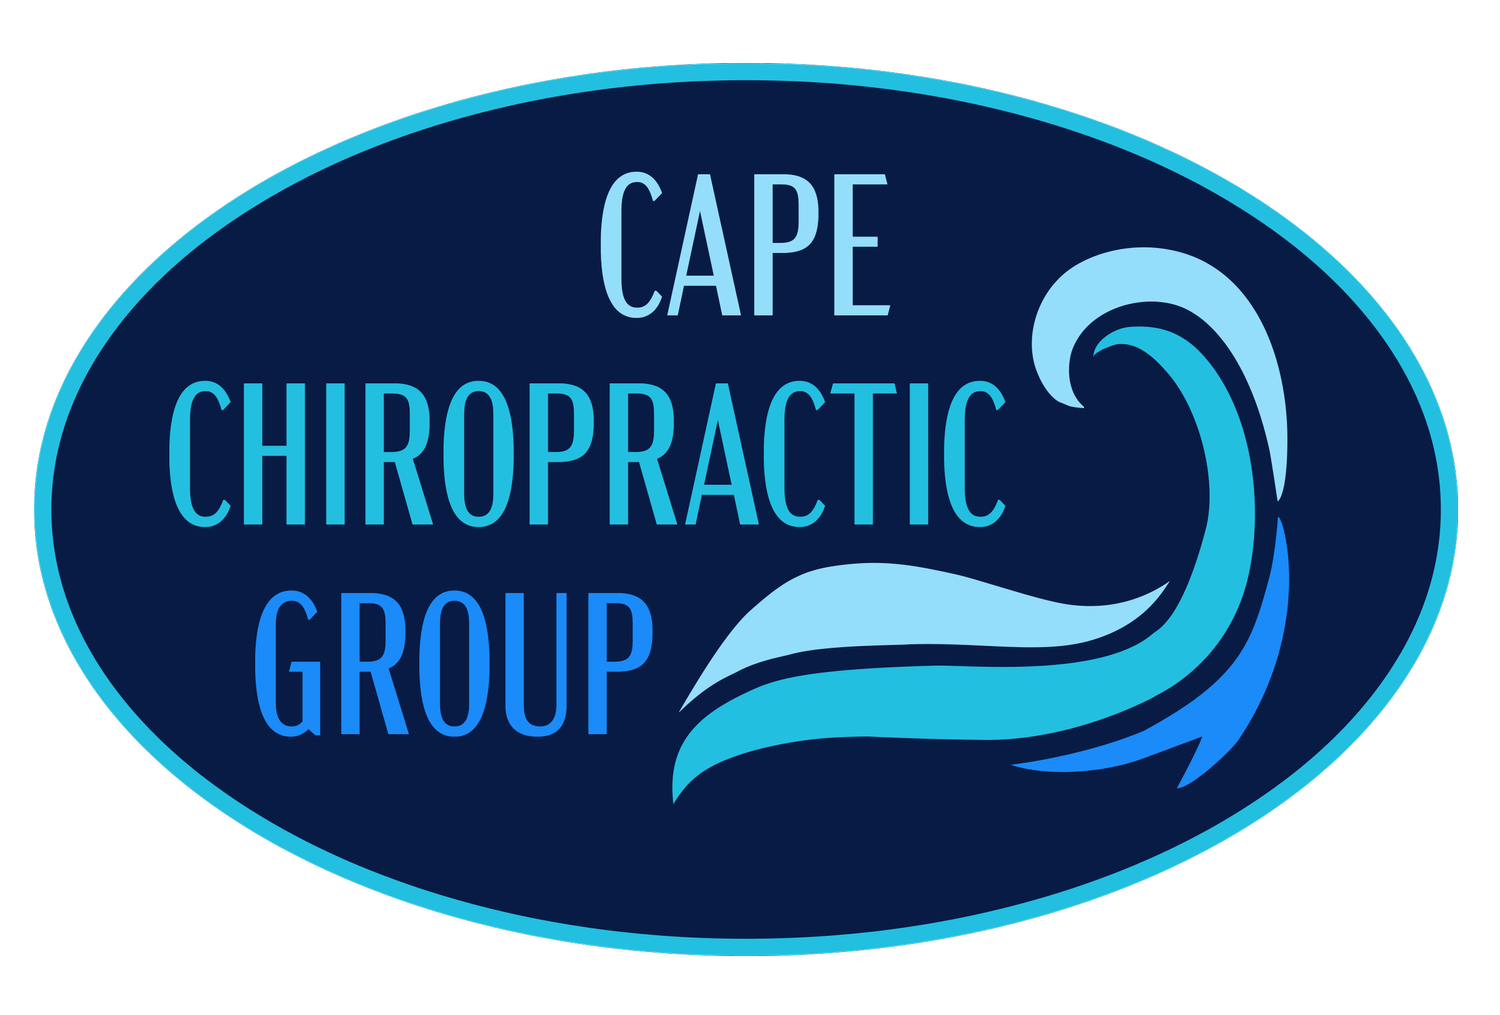 Cape Chiropractic Group